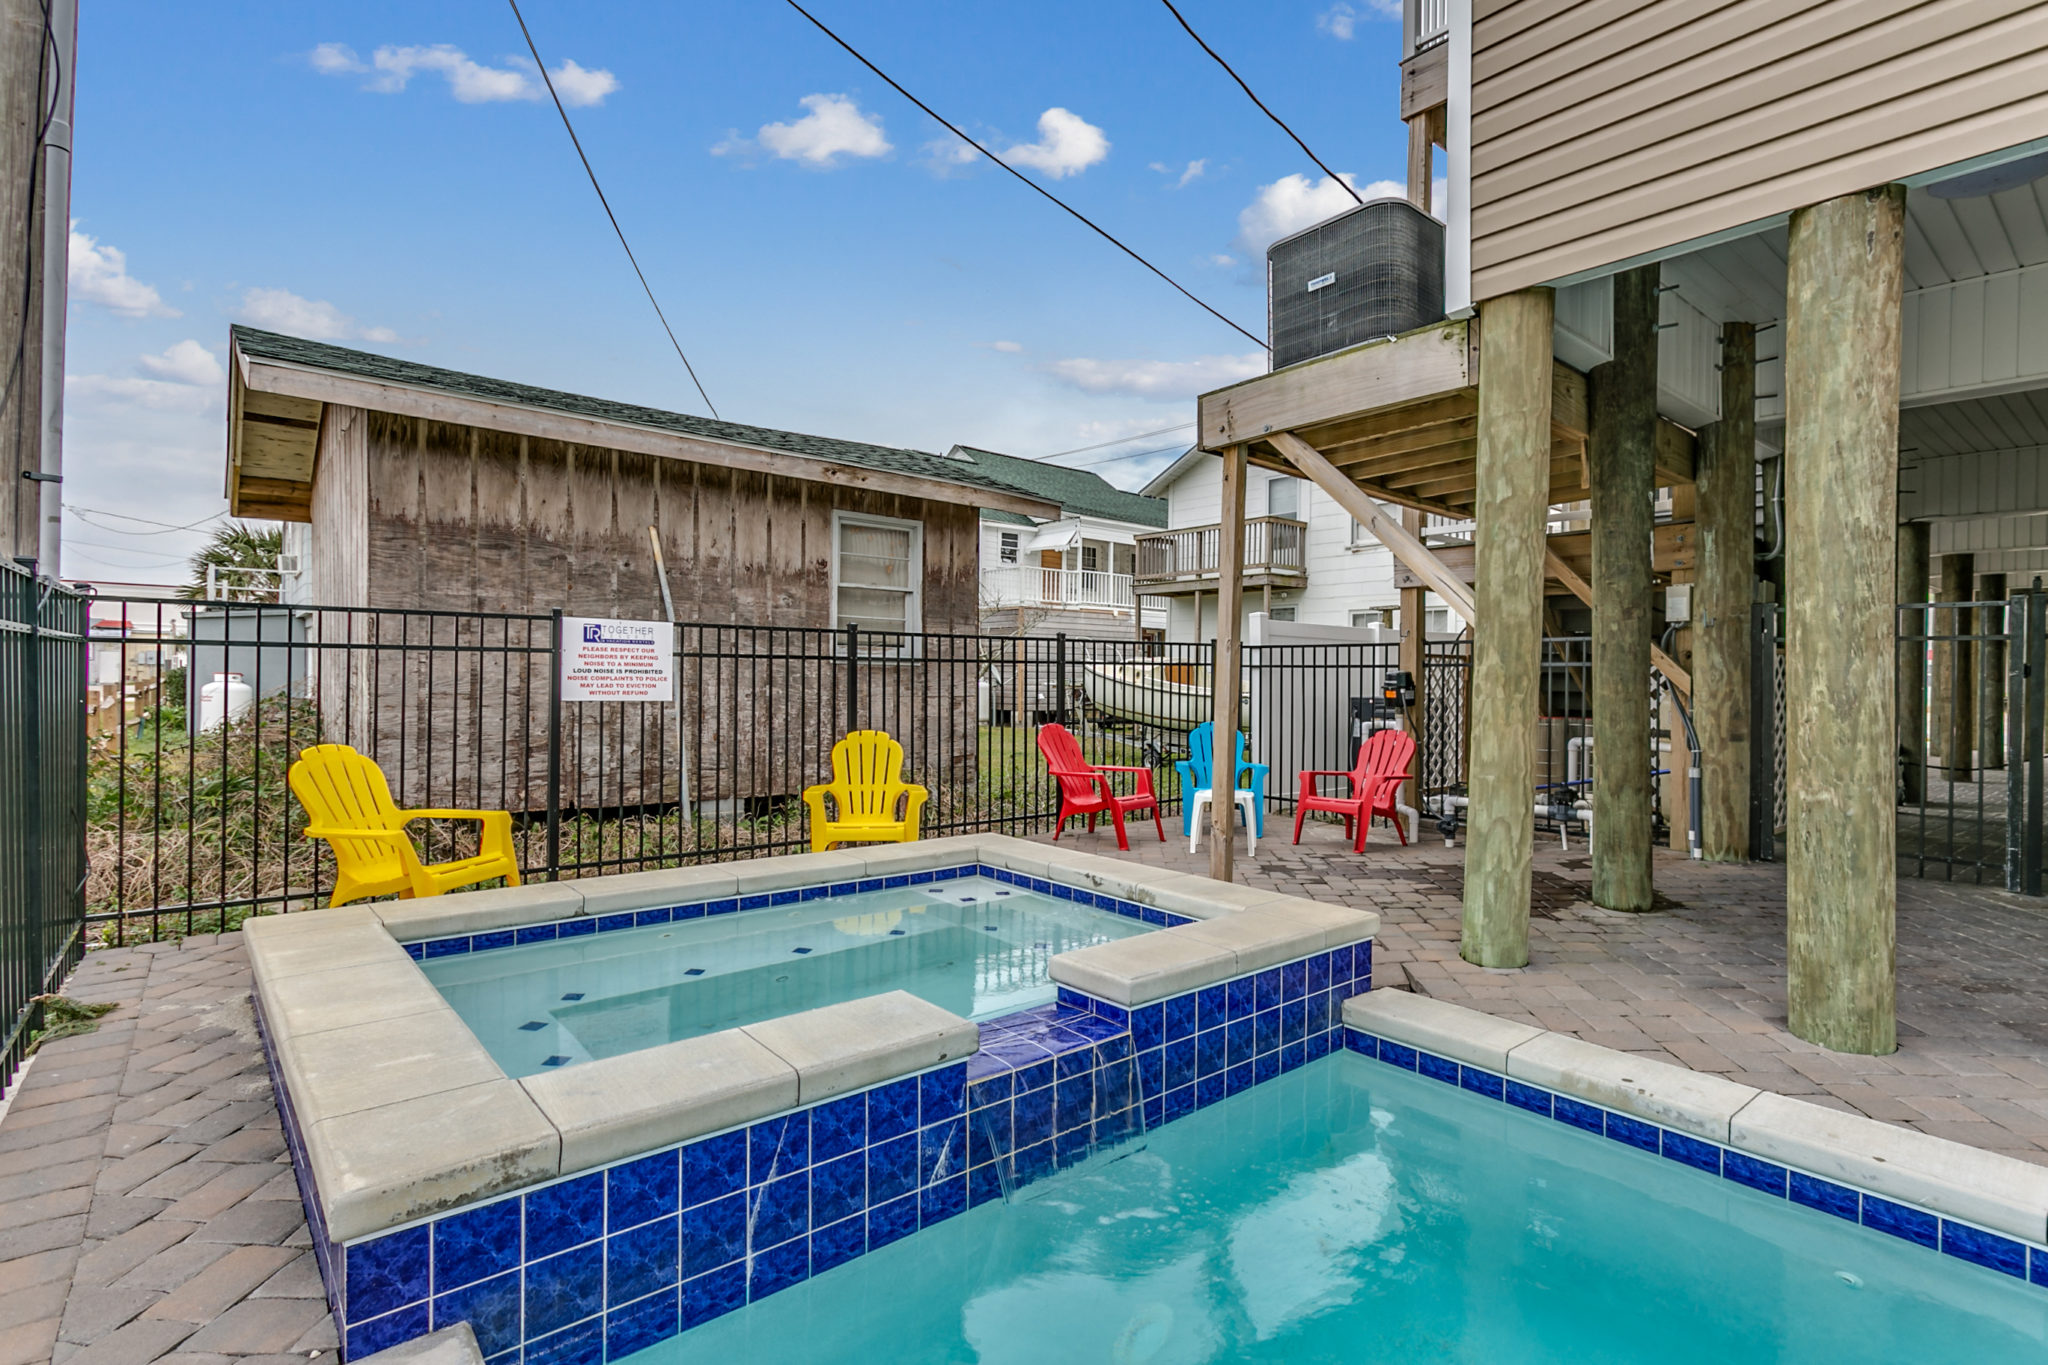 2201 Spring Street outdoor pool, hot tub, patio, picnic table, gas grills, Adirondack chairs.